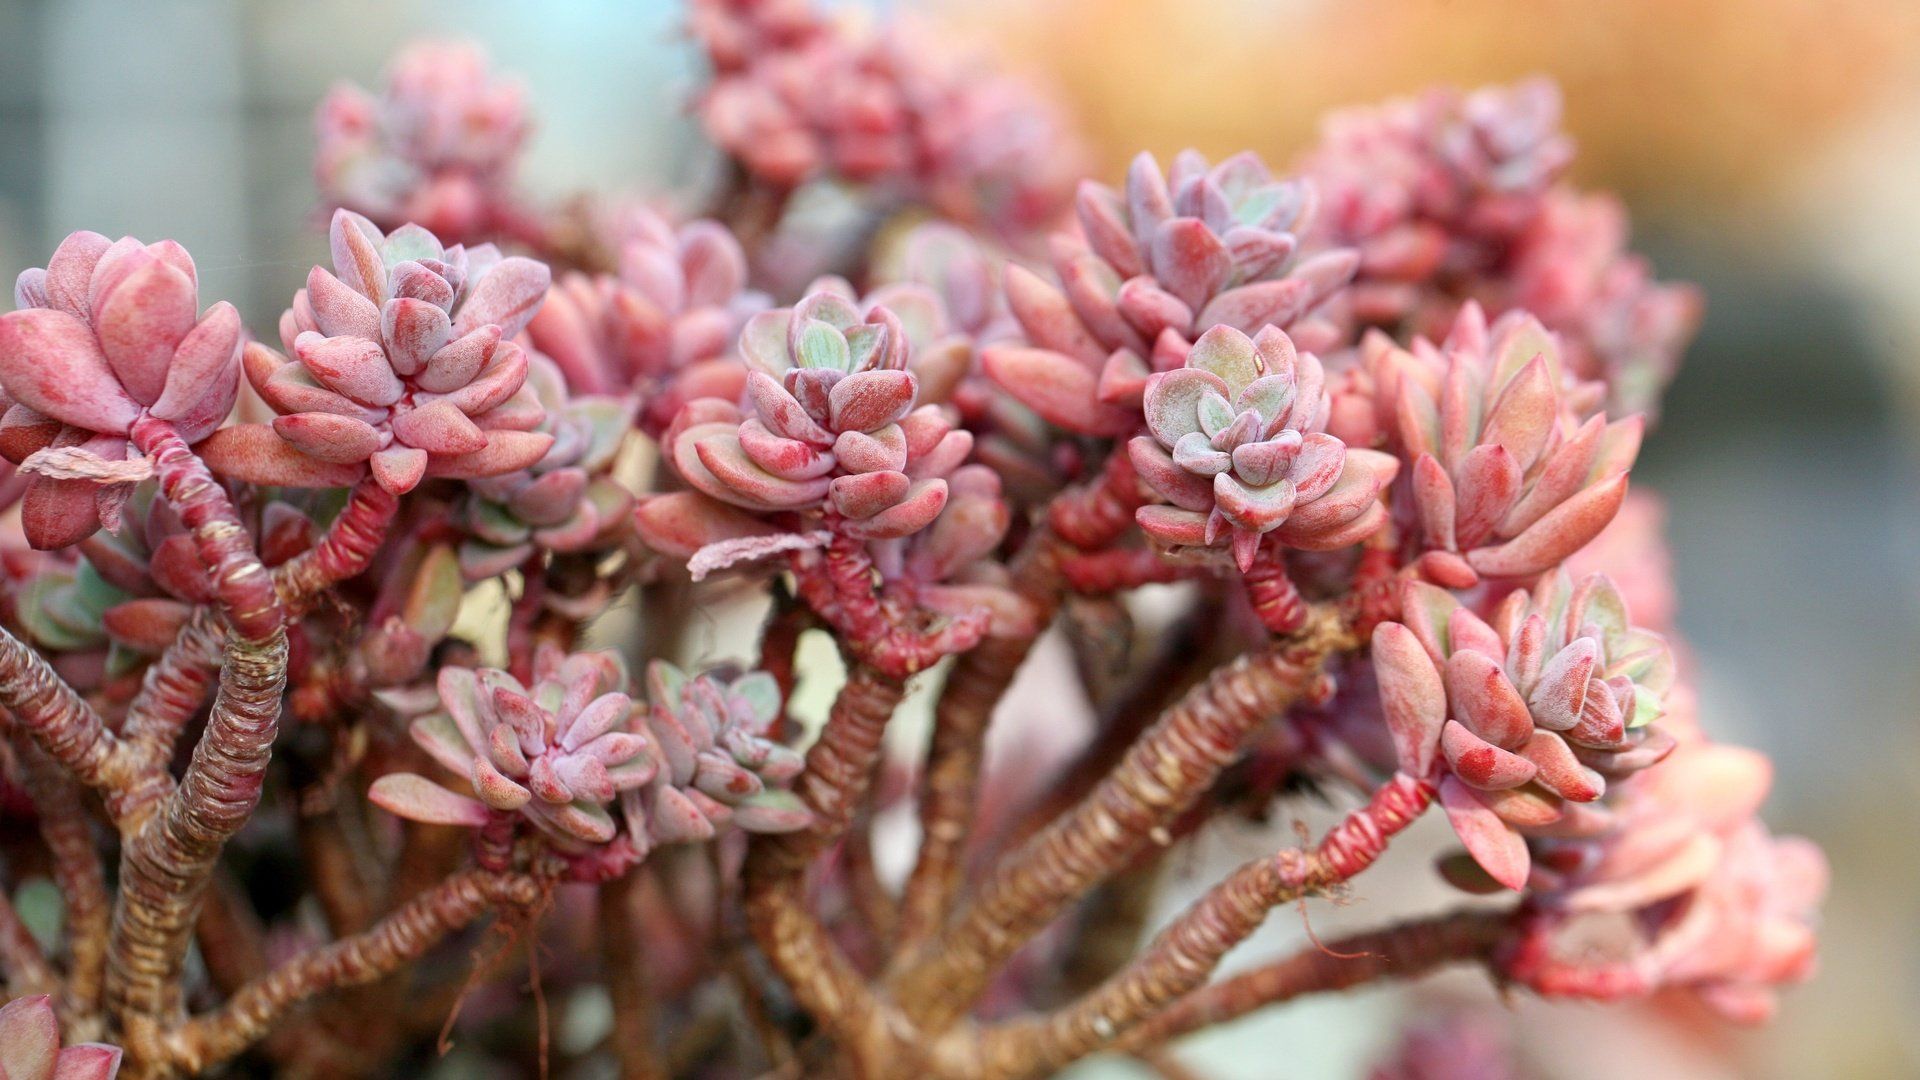 Succulent download free wallpaper image search